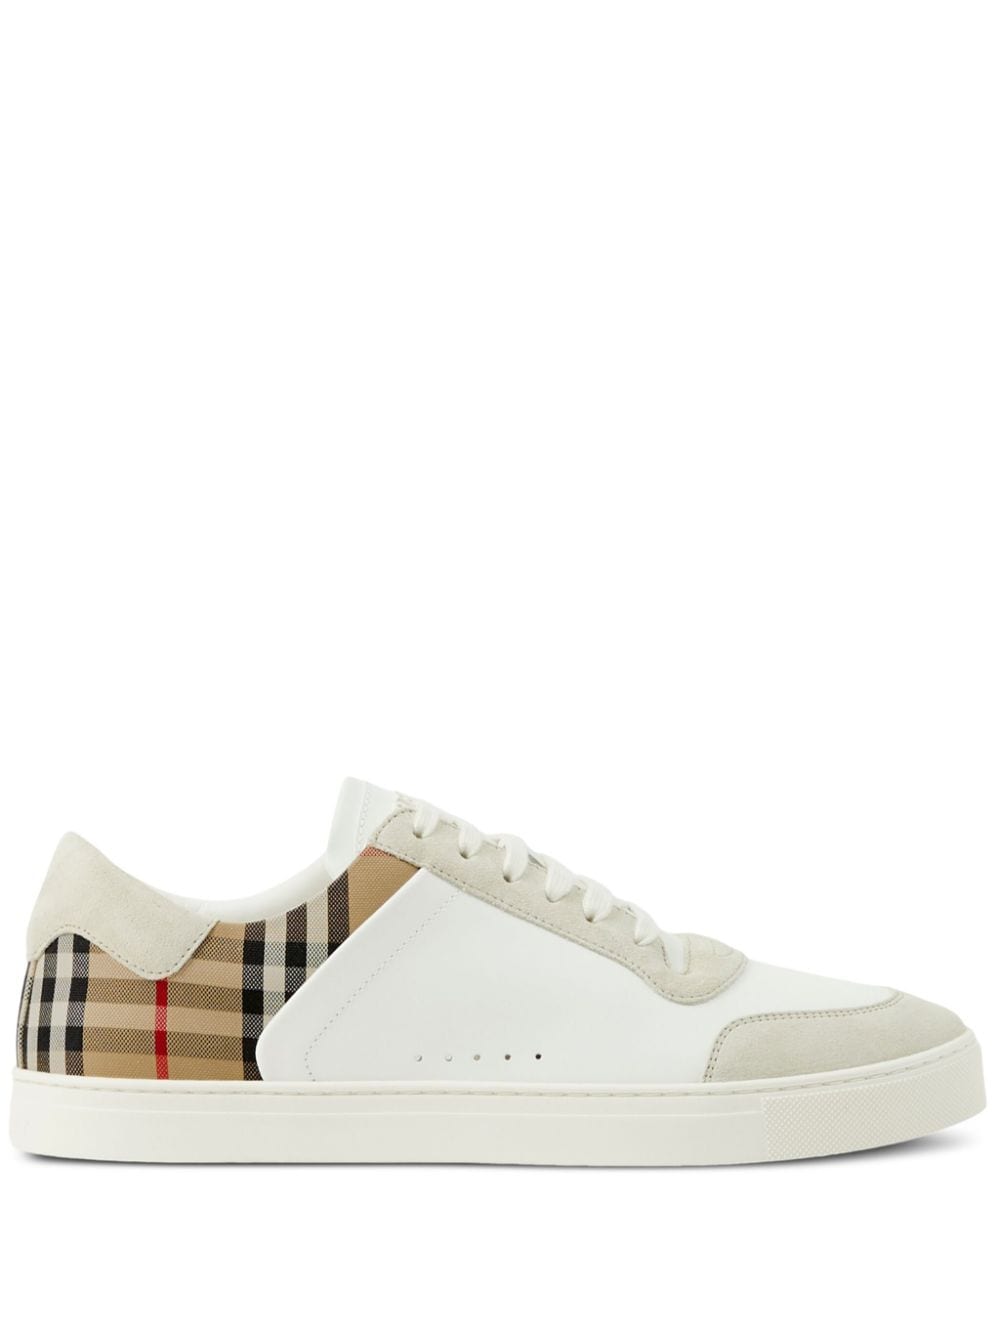 Shop Burberry Vintage Check Panelled Leather Sneakers For Men In White